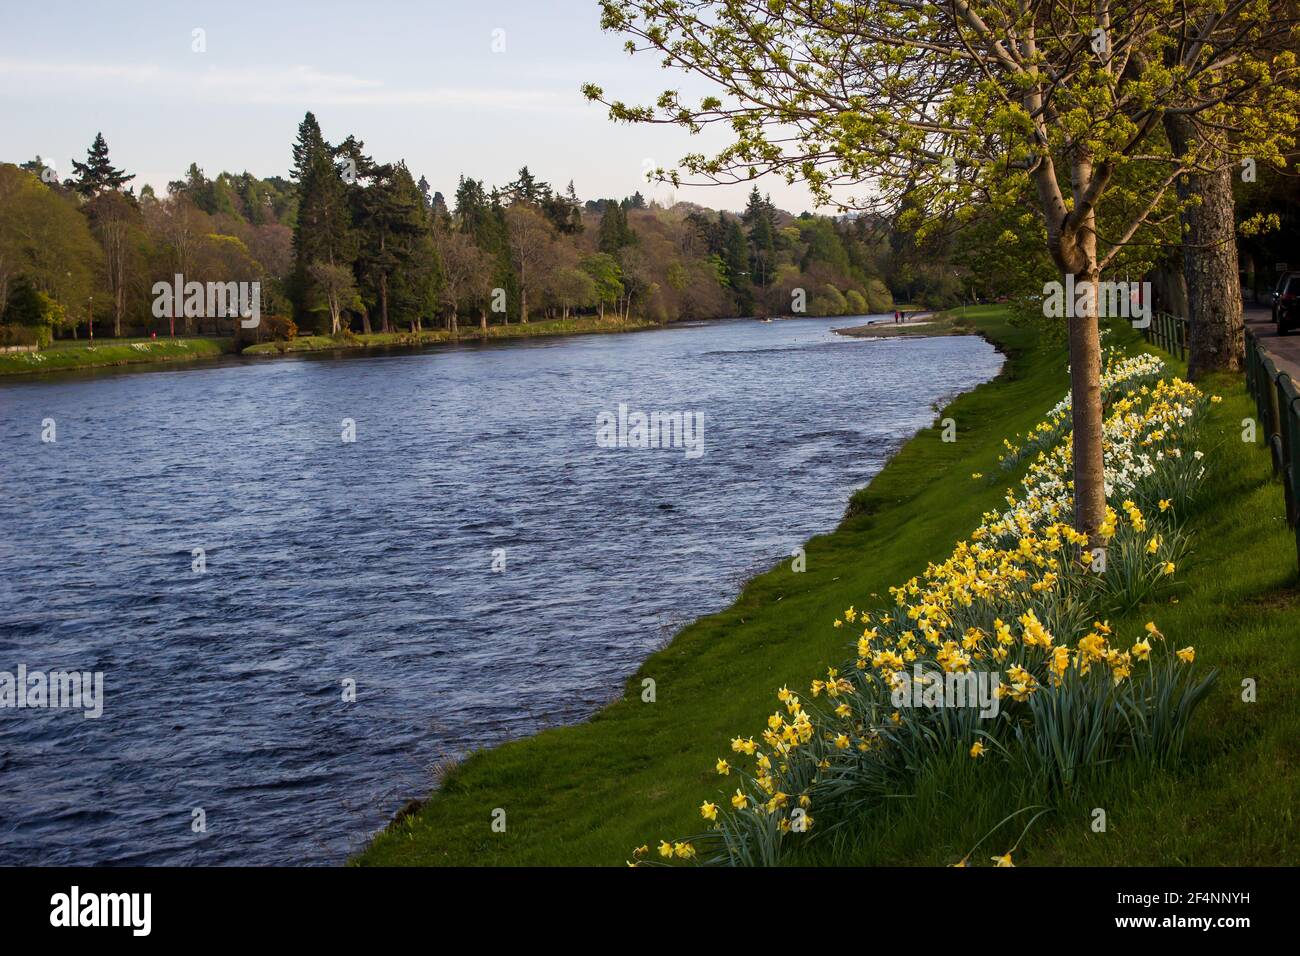 View of the Ness Islands, a series of small islands in the River Ness, Inverness, Scotland, in the spring with yellow daffodils in the foreground Stock Photo